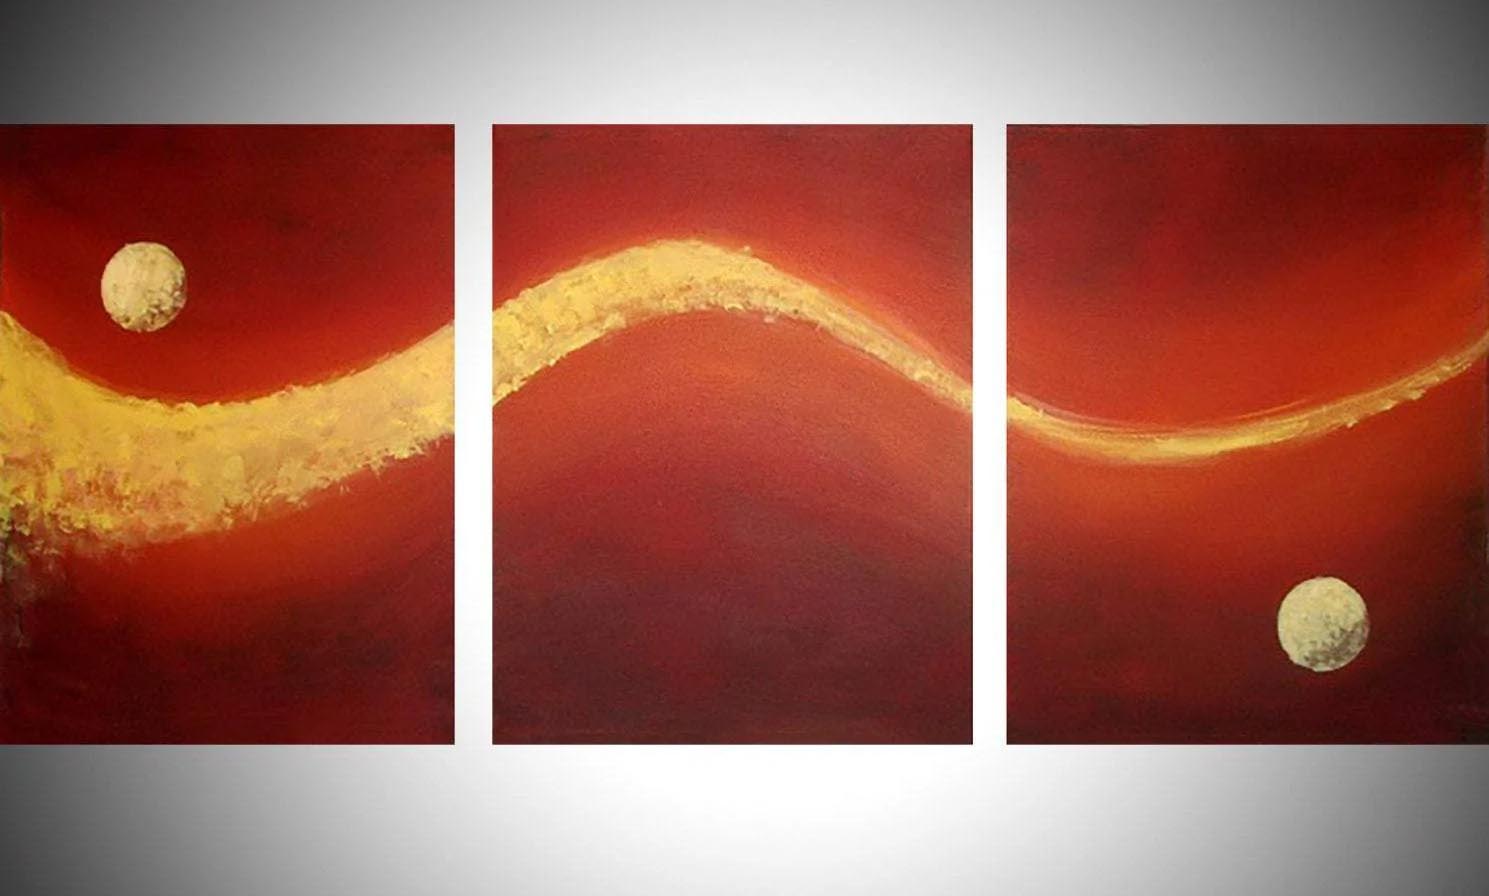 triptych-painting-for-sale-in-impasto-moon-dust-original-18352972365973_1024x1024@2x